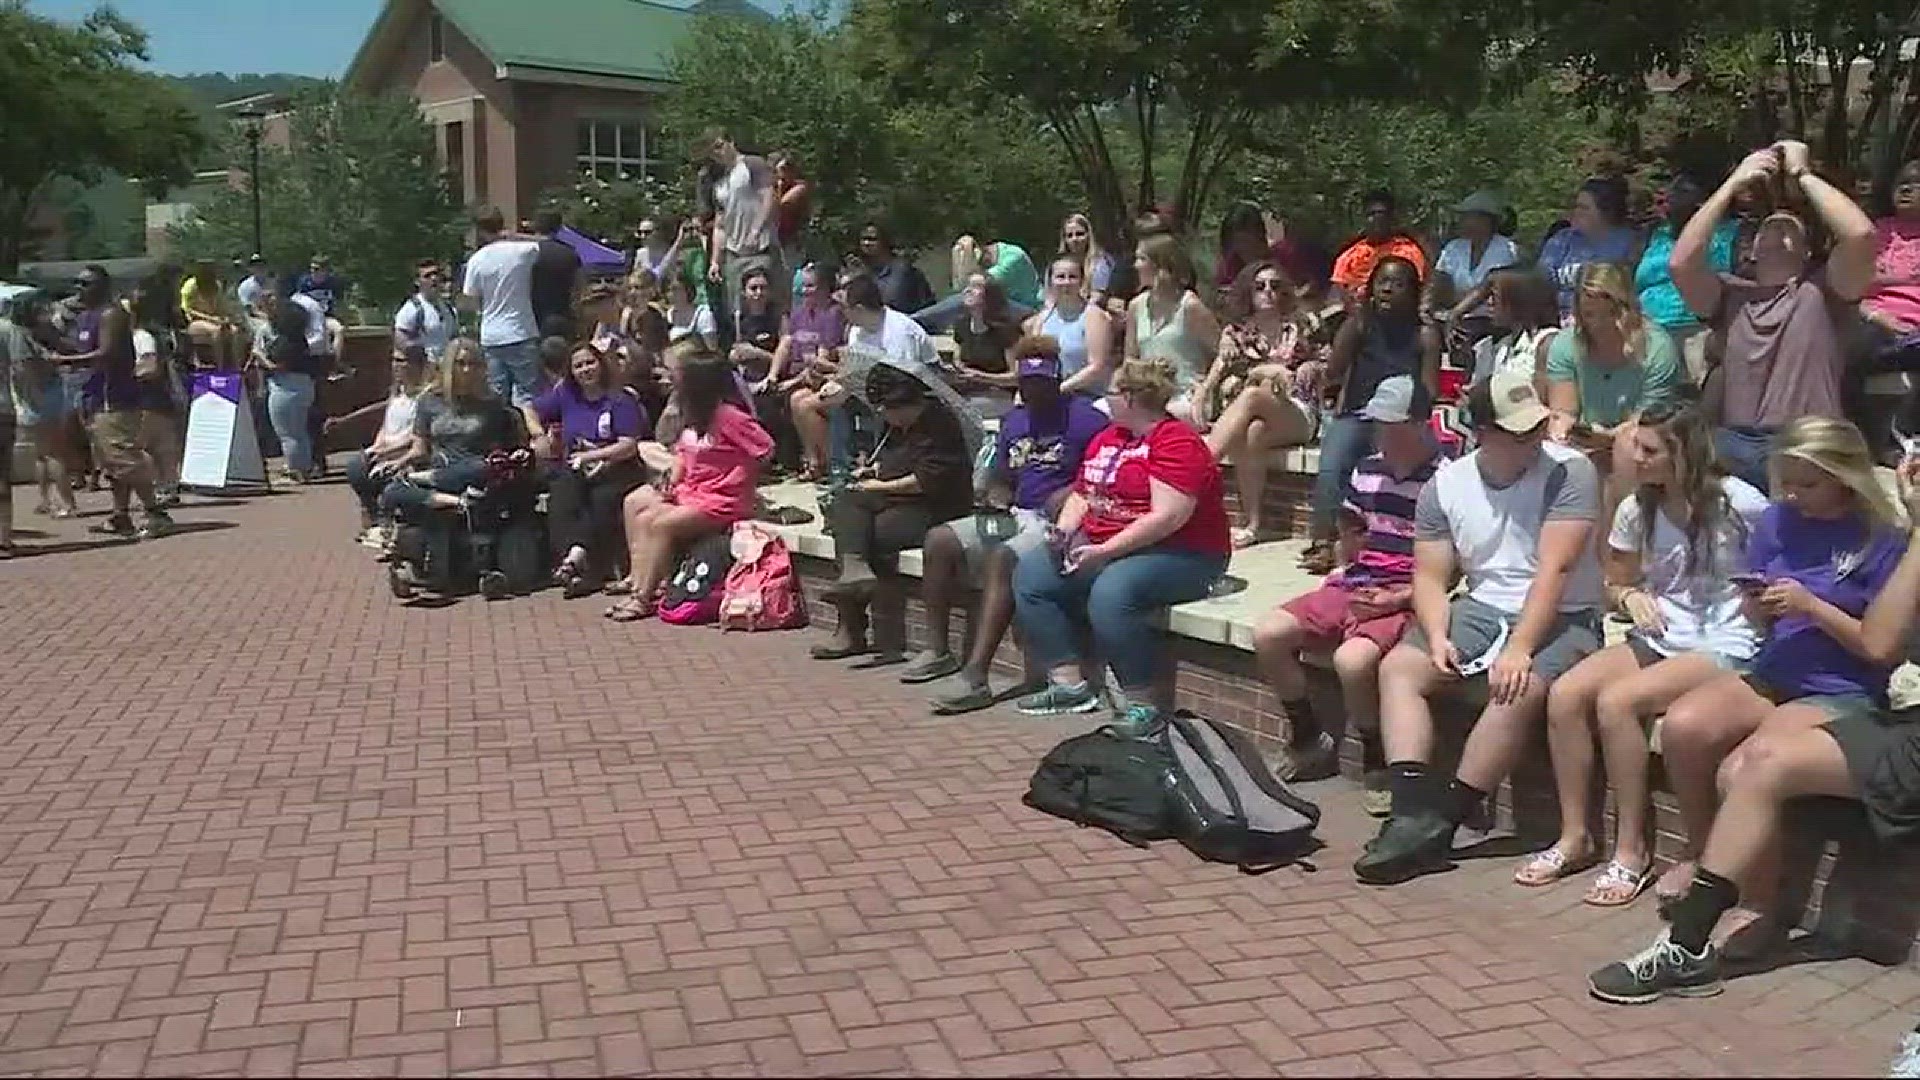 The first day of classes were cancelled to watch the historic eclipse